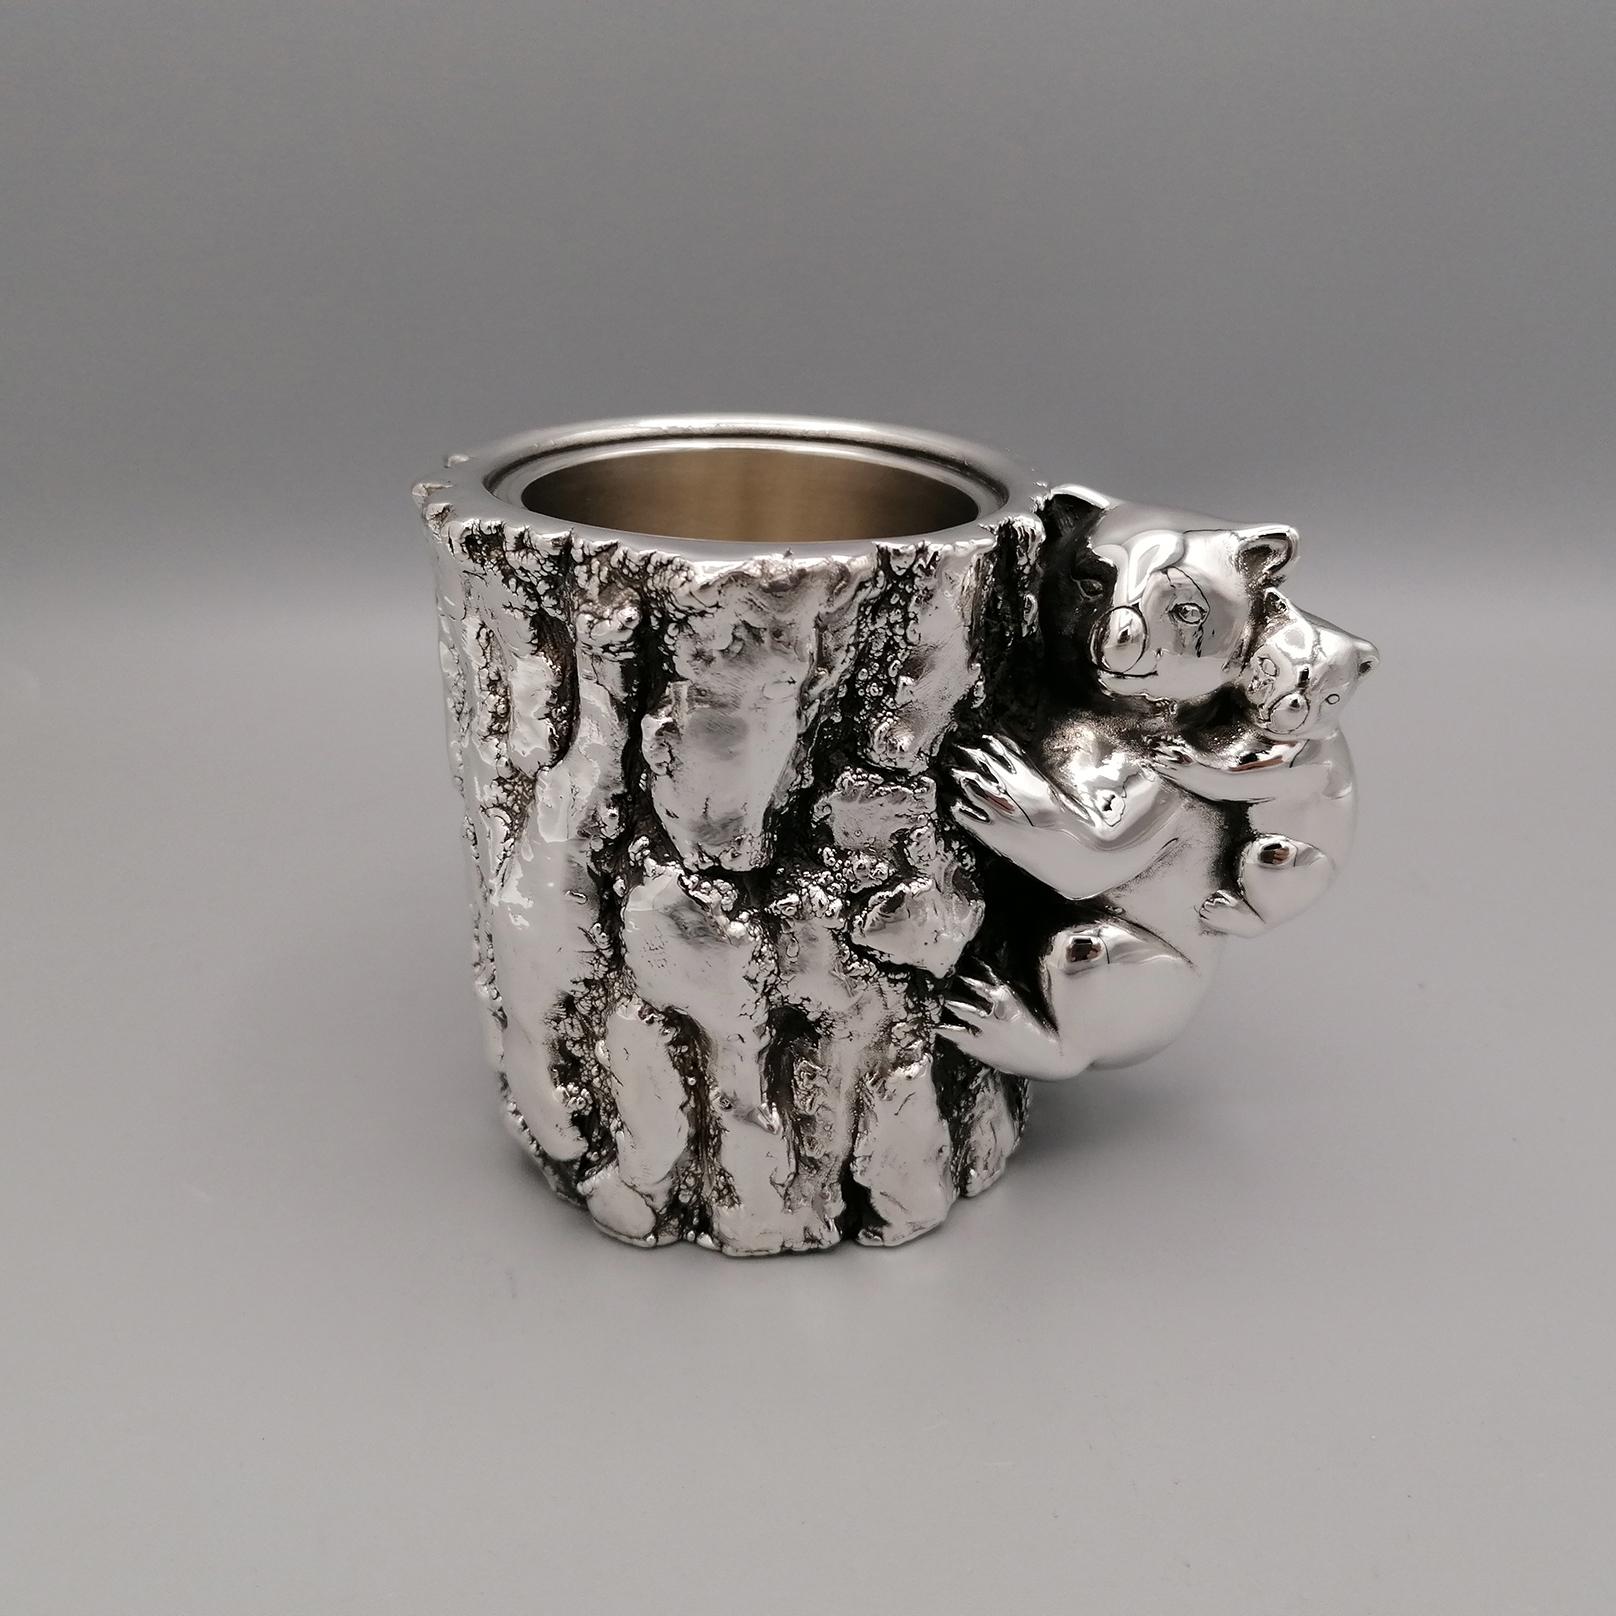 Amazing silver mug made with the lost wax technique depicting a tree trunk where a Koala with her puppy is clinging.
The figure of the mother Koala and her cub was placed on the trunk as a handle, handle for the mug
This type of processing allows